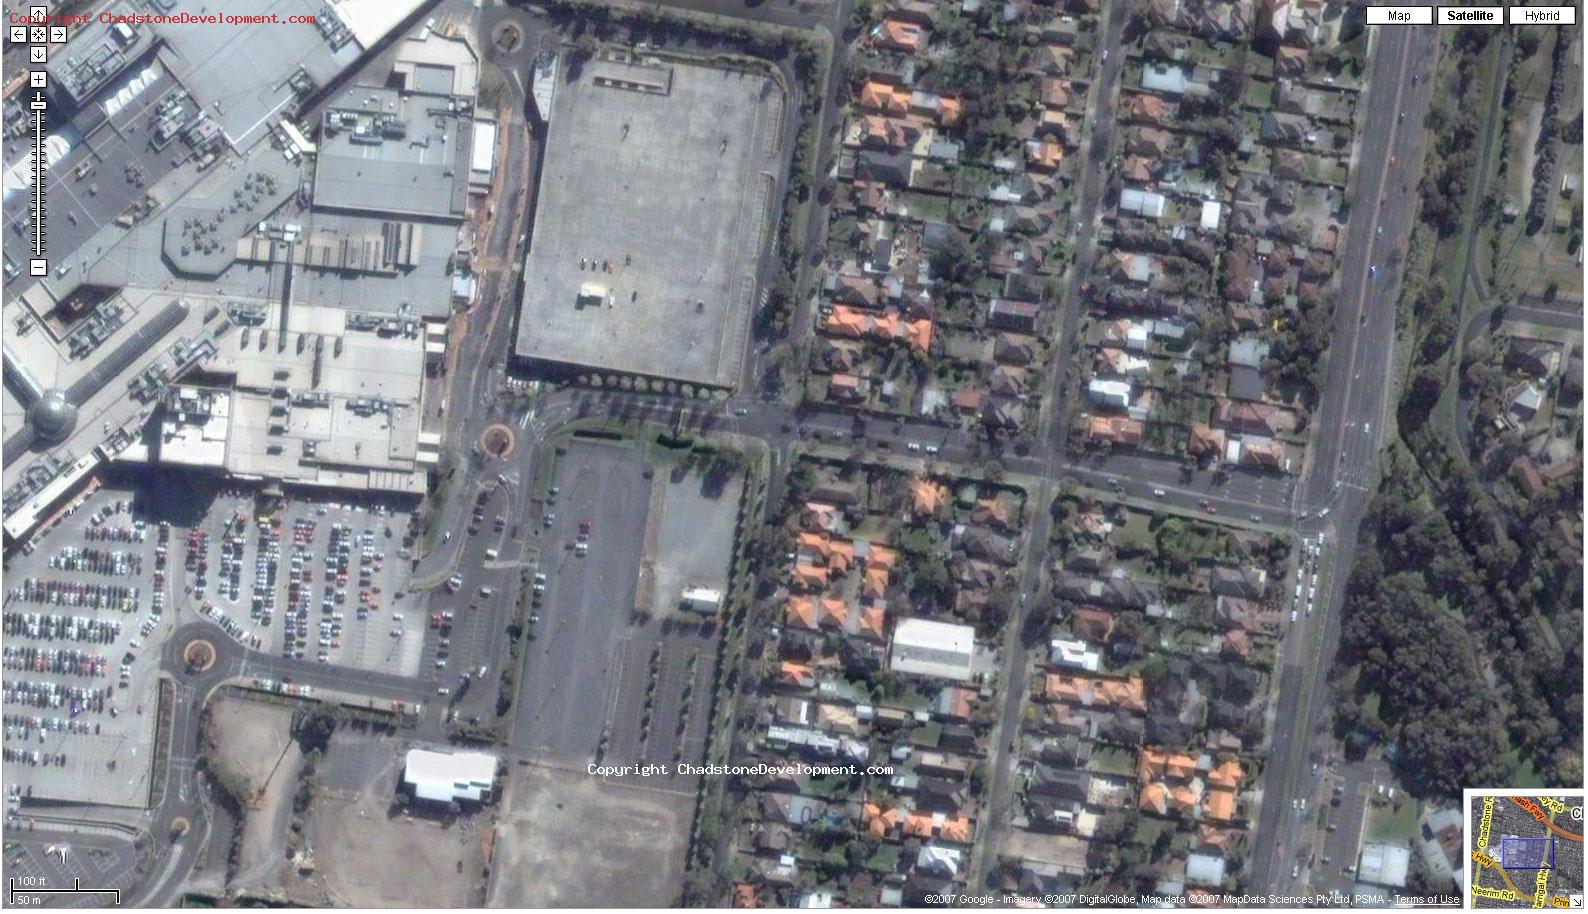 Google Aerial Photo of Middle Road, late 2006 - Chadstone Development Discussions